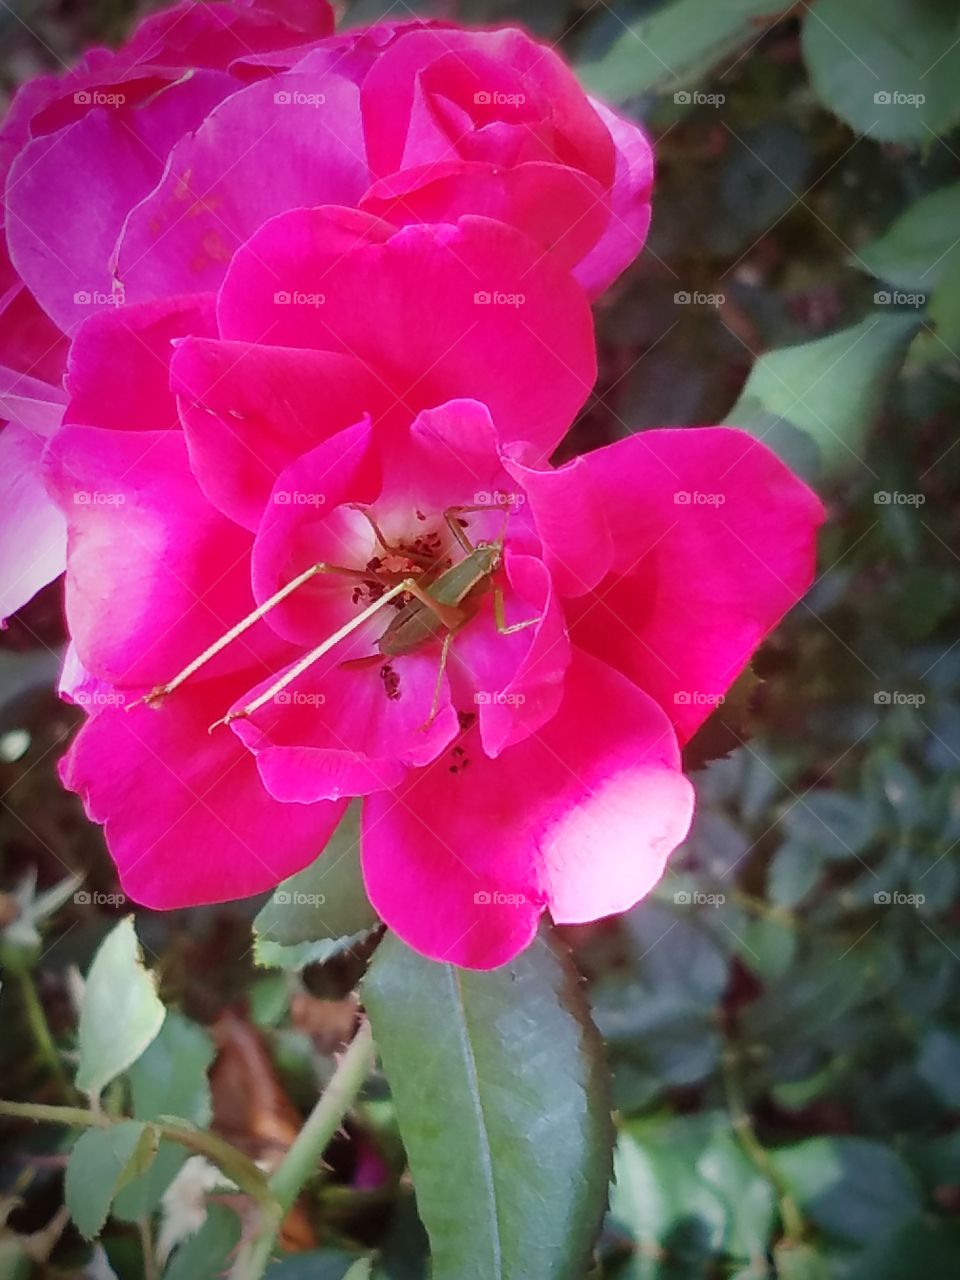 A grasshopper hanging out in a flowe.